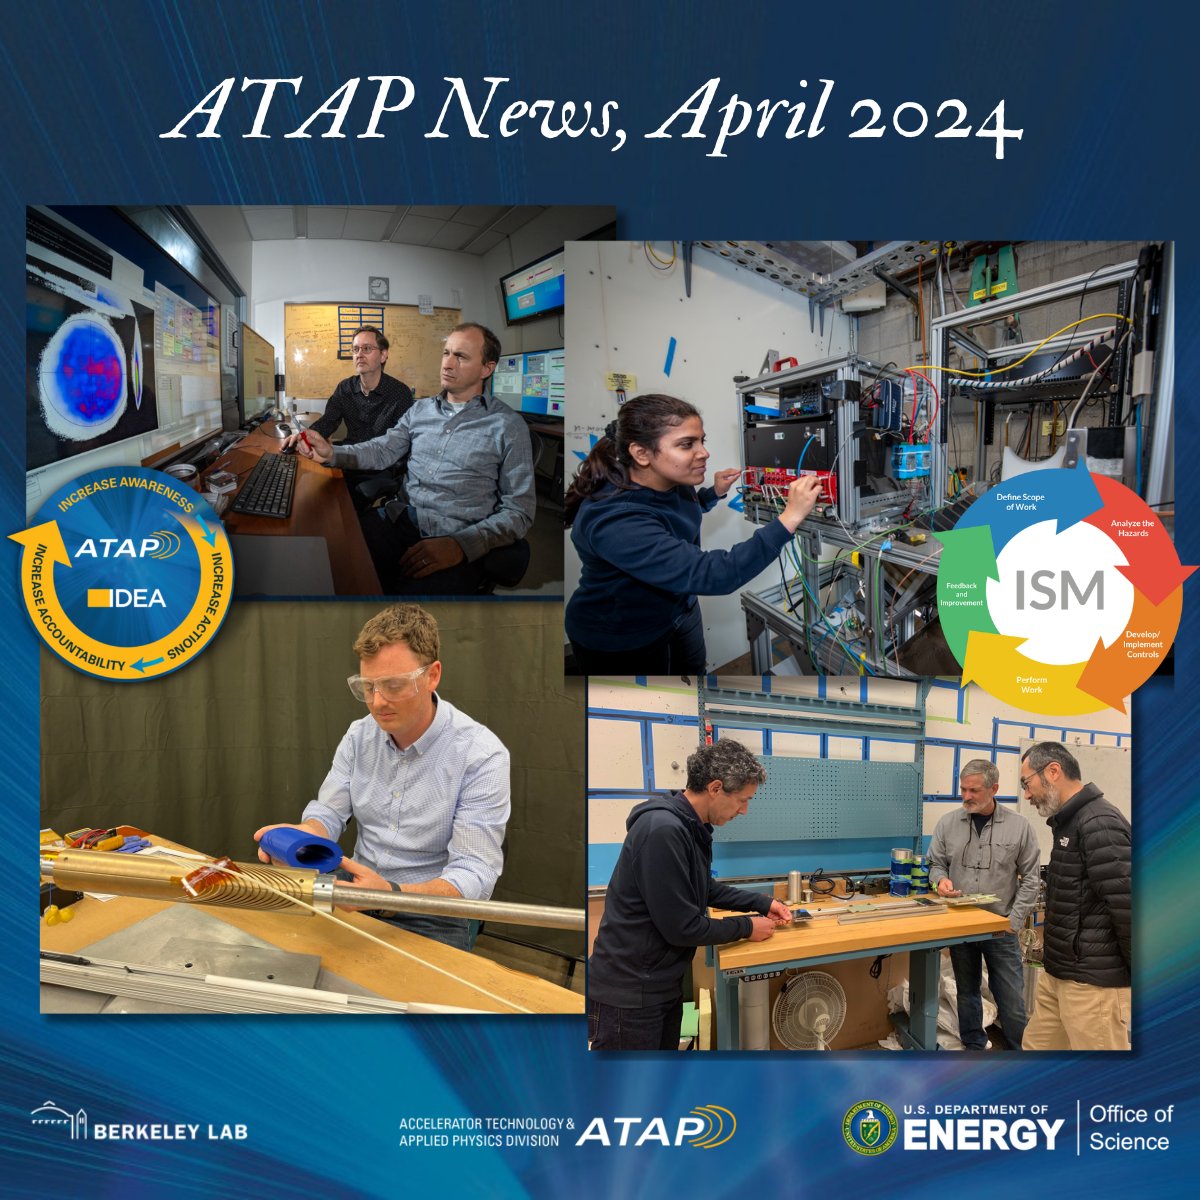 In the latest issue of ATAP News, read about muon imaging, safeguarding high-temperature superconducting magnets, mathematically modeling elliptical-bore accelerator magnets, prototype superconducting cables, and more! @BerkeleyLab @doescience @ENERGY atap.lbl.gov/directors-corn…